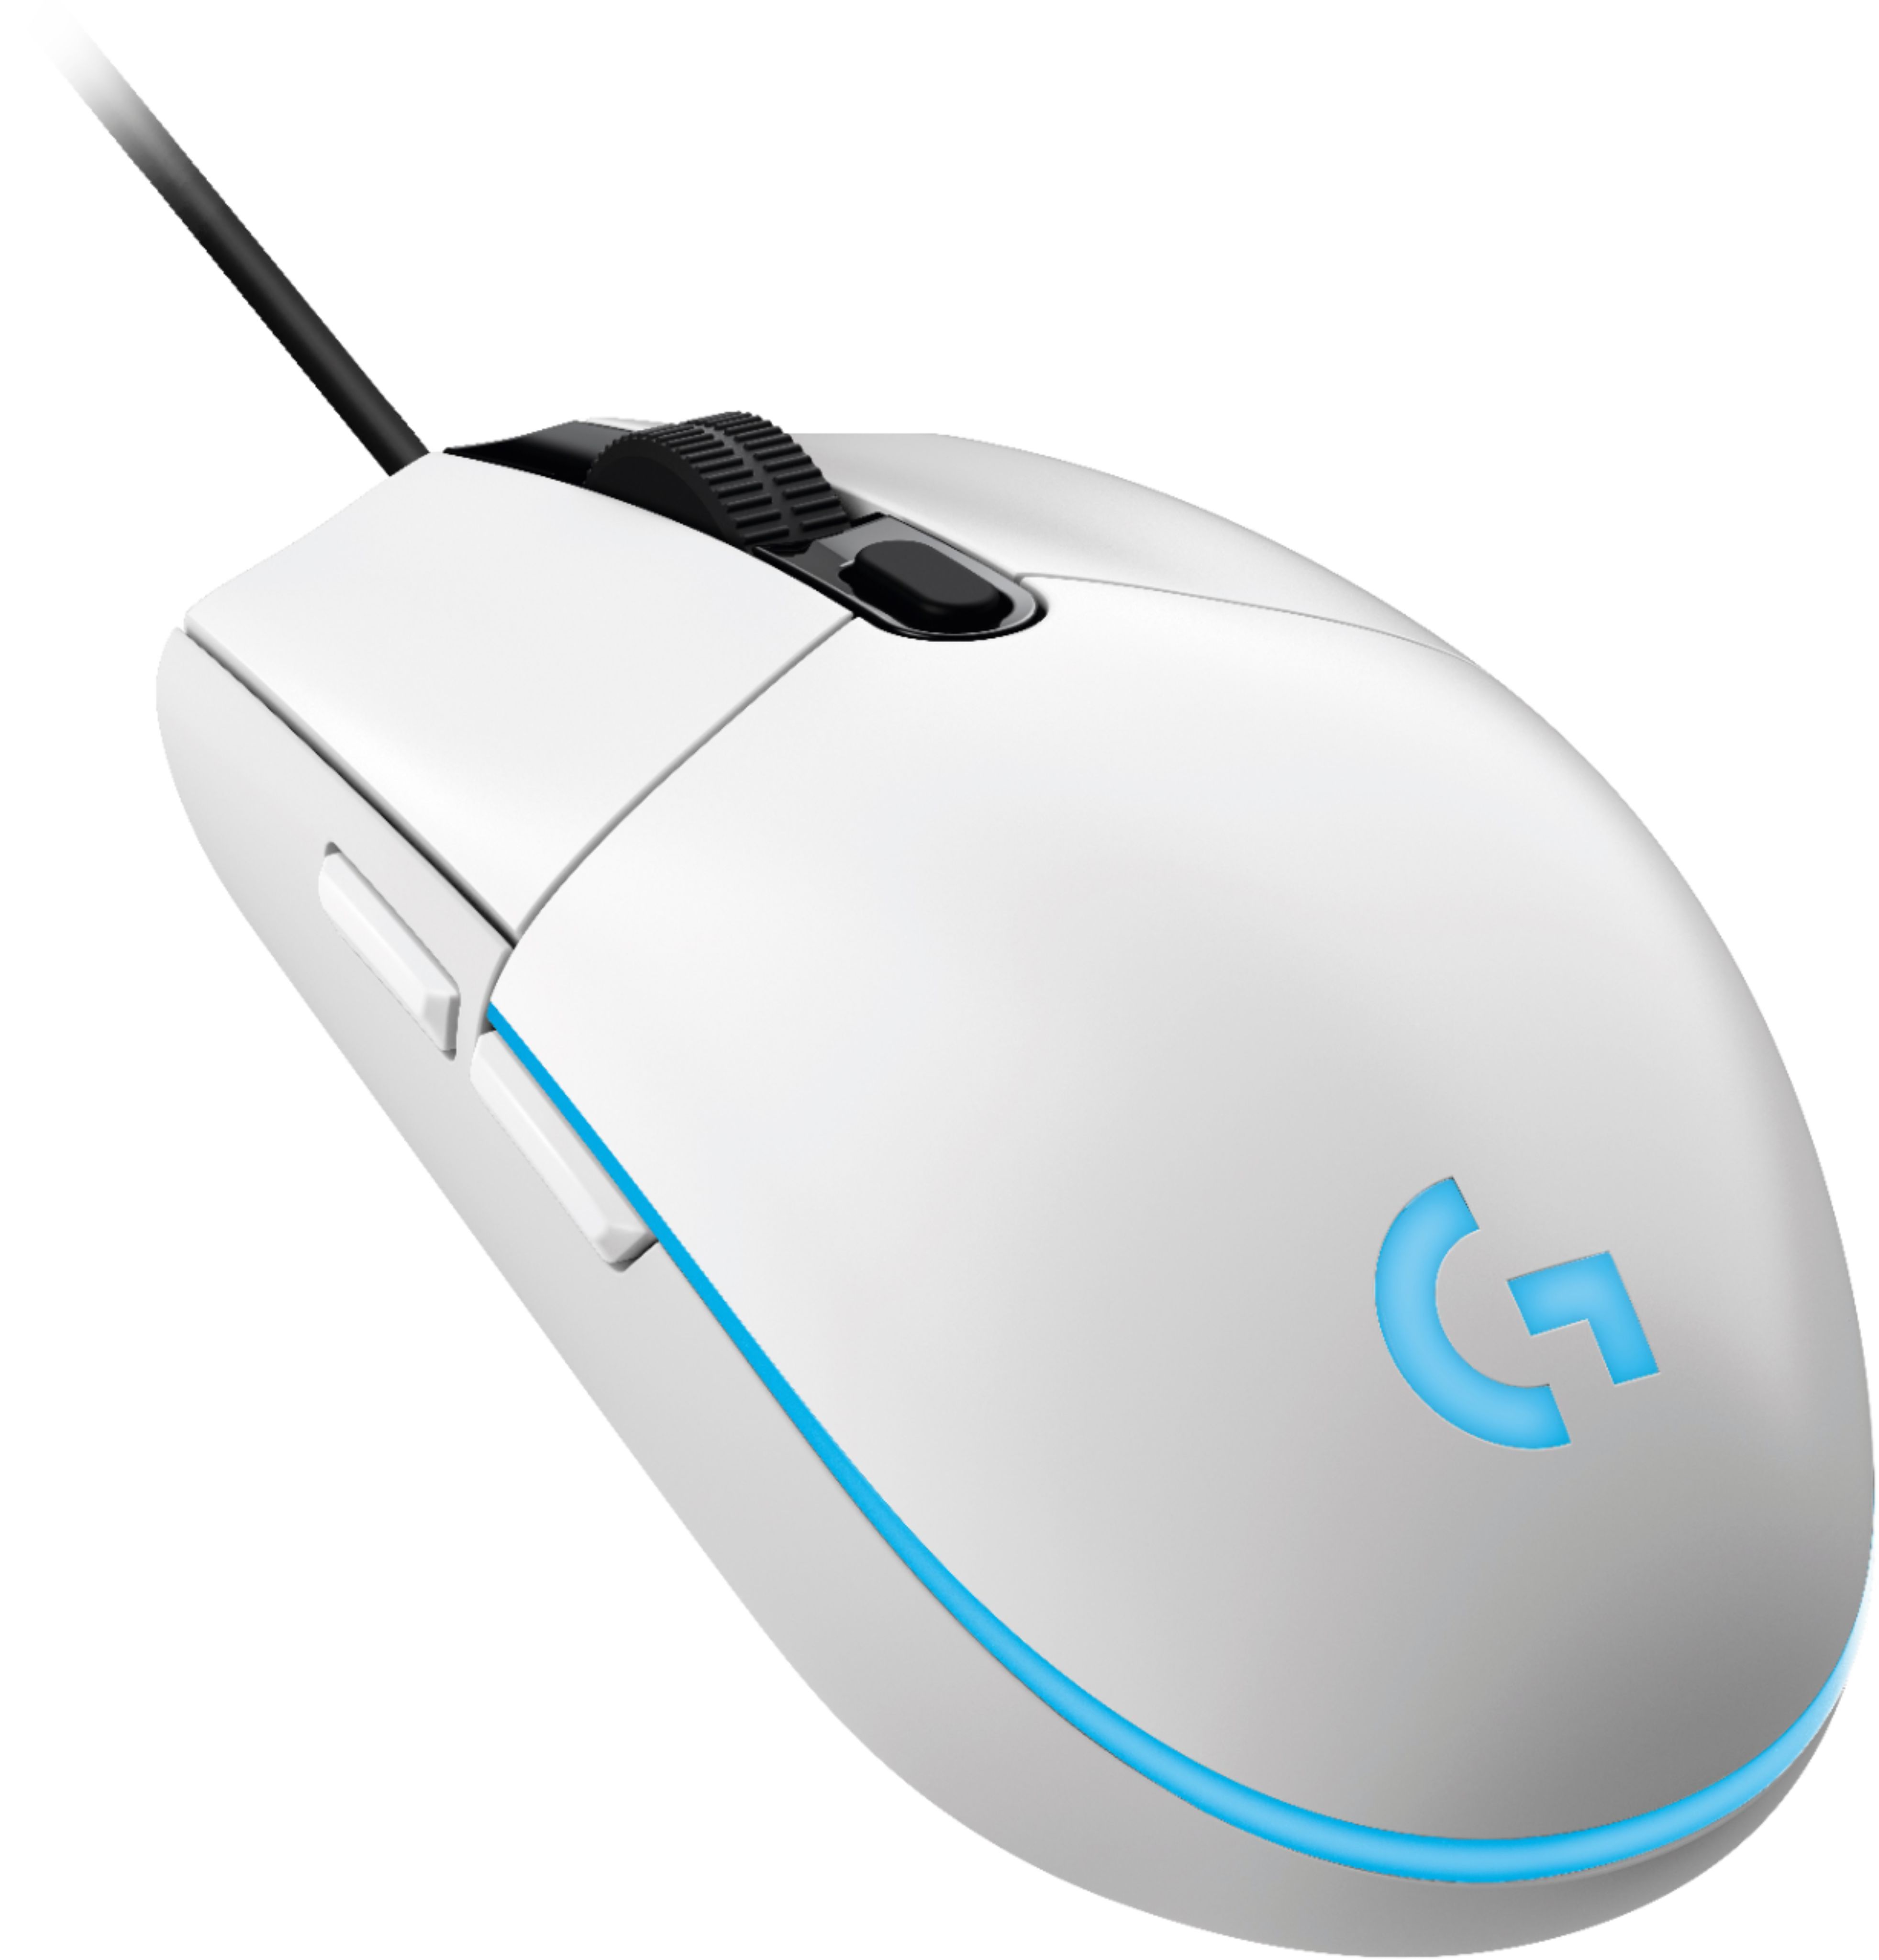 Logitech G203 LIGHTSYNC Wired Optical Gaming Mouse with 8,000 DPI sensor  White 910-005791 - Best Buy